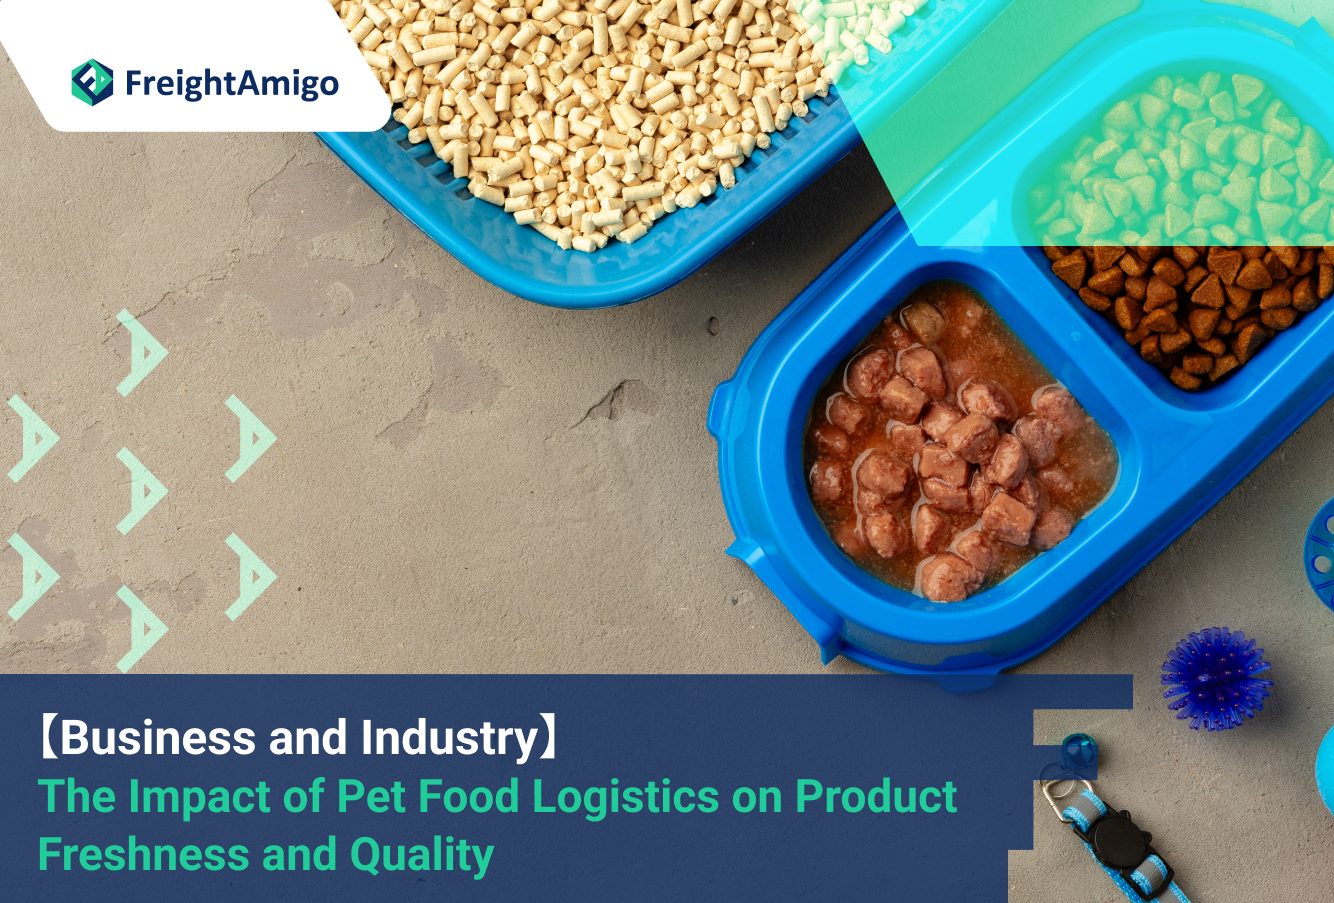 【Business and Industry】 The Impact of Pet Food Logistics on Product Freshness and Quality